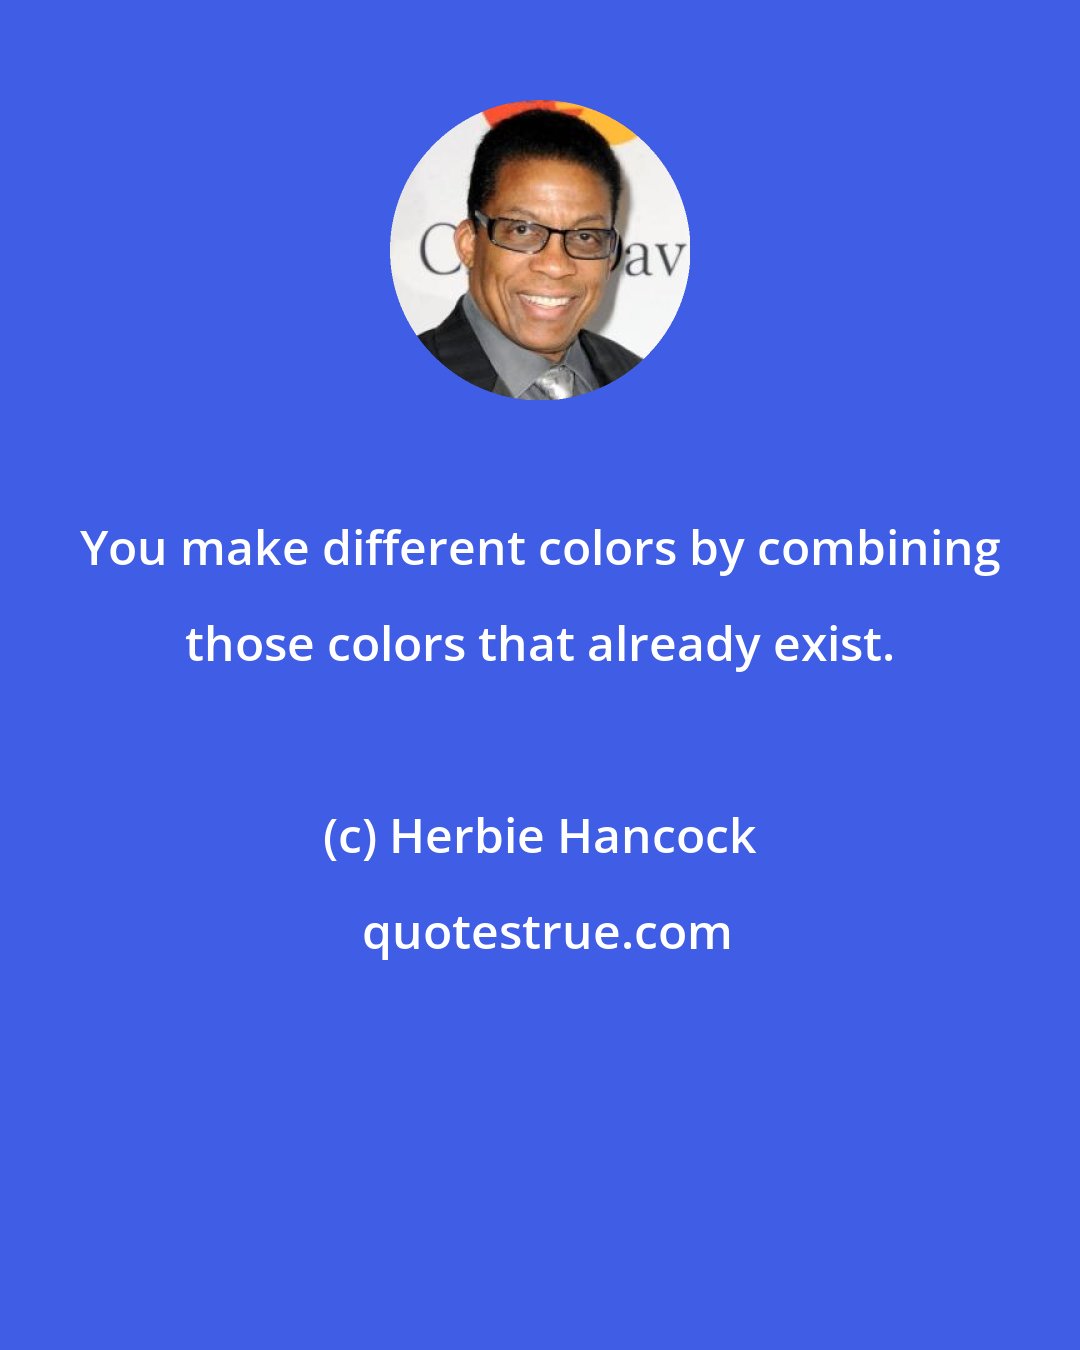 Herbie Hancock: You make different colors by combining those colors that already exist.